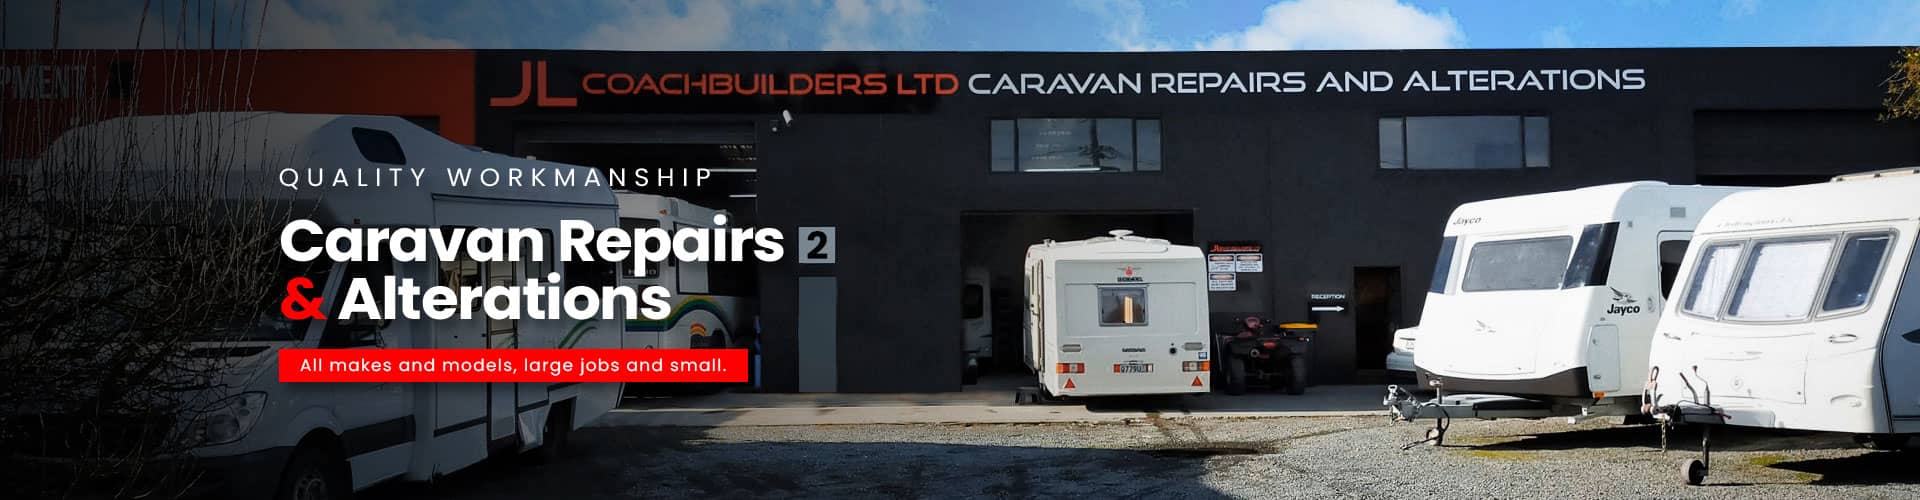 Caravan Services in Christchurch: Expert Tips and Recommendations